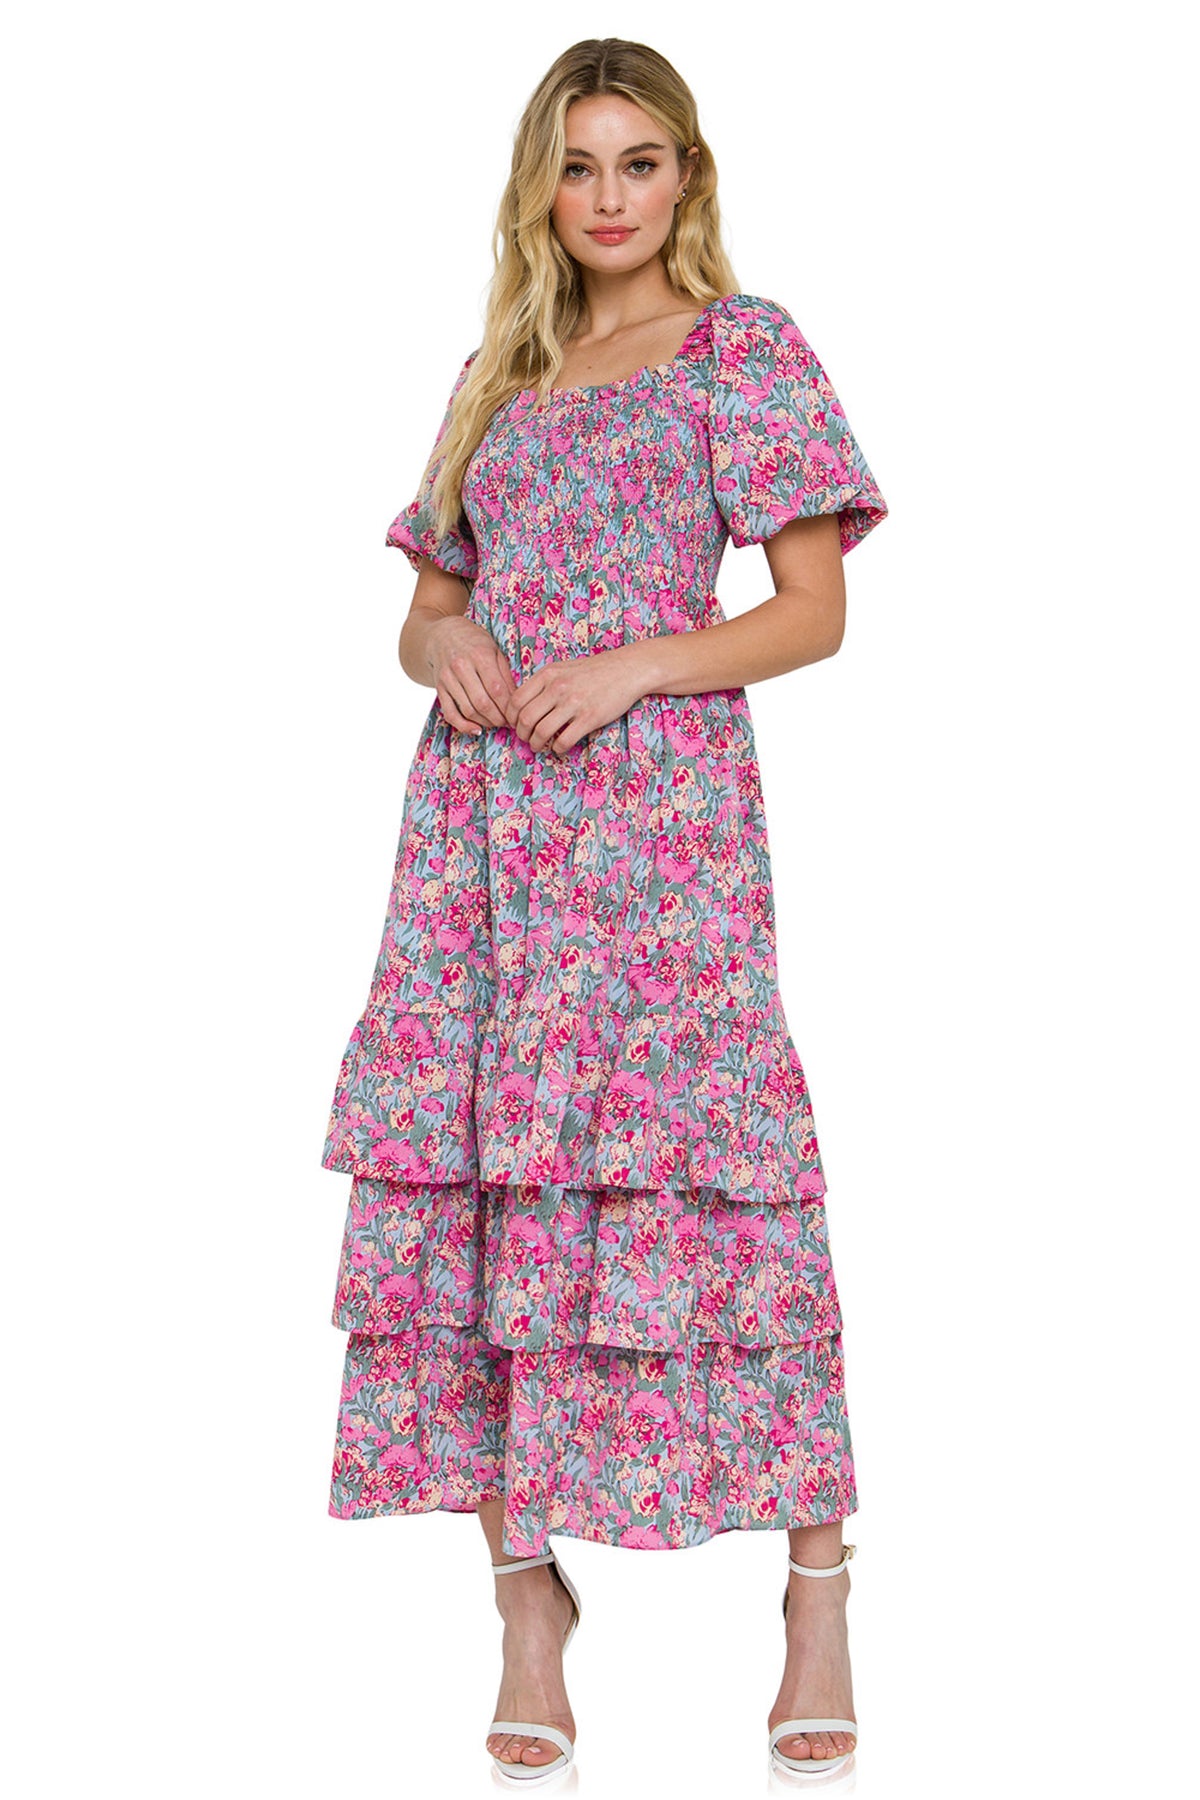 FREE THE ROSES - Floral Print Maxi Dress - DRESSES available at Objectrare